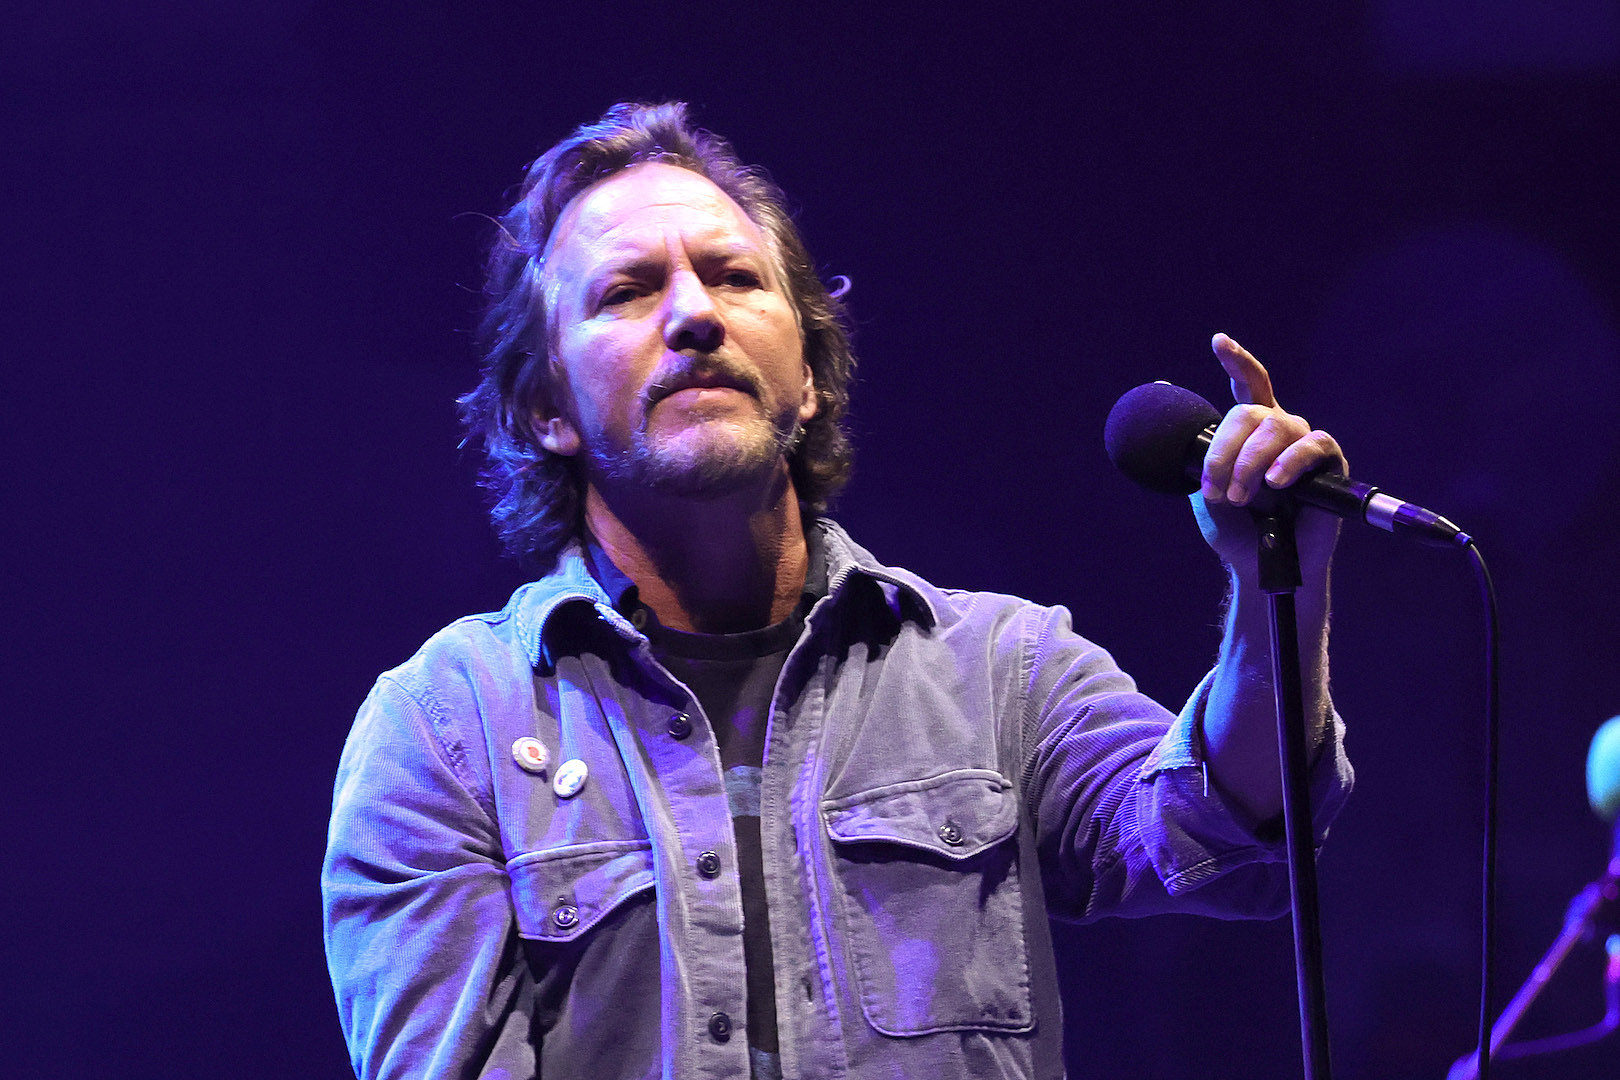 Eddie Vedder Shares Heartbreaking Story About Friend During Show